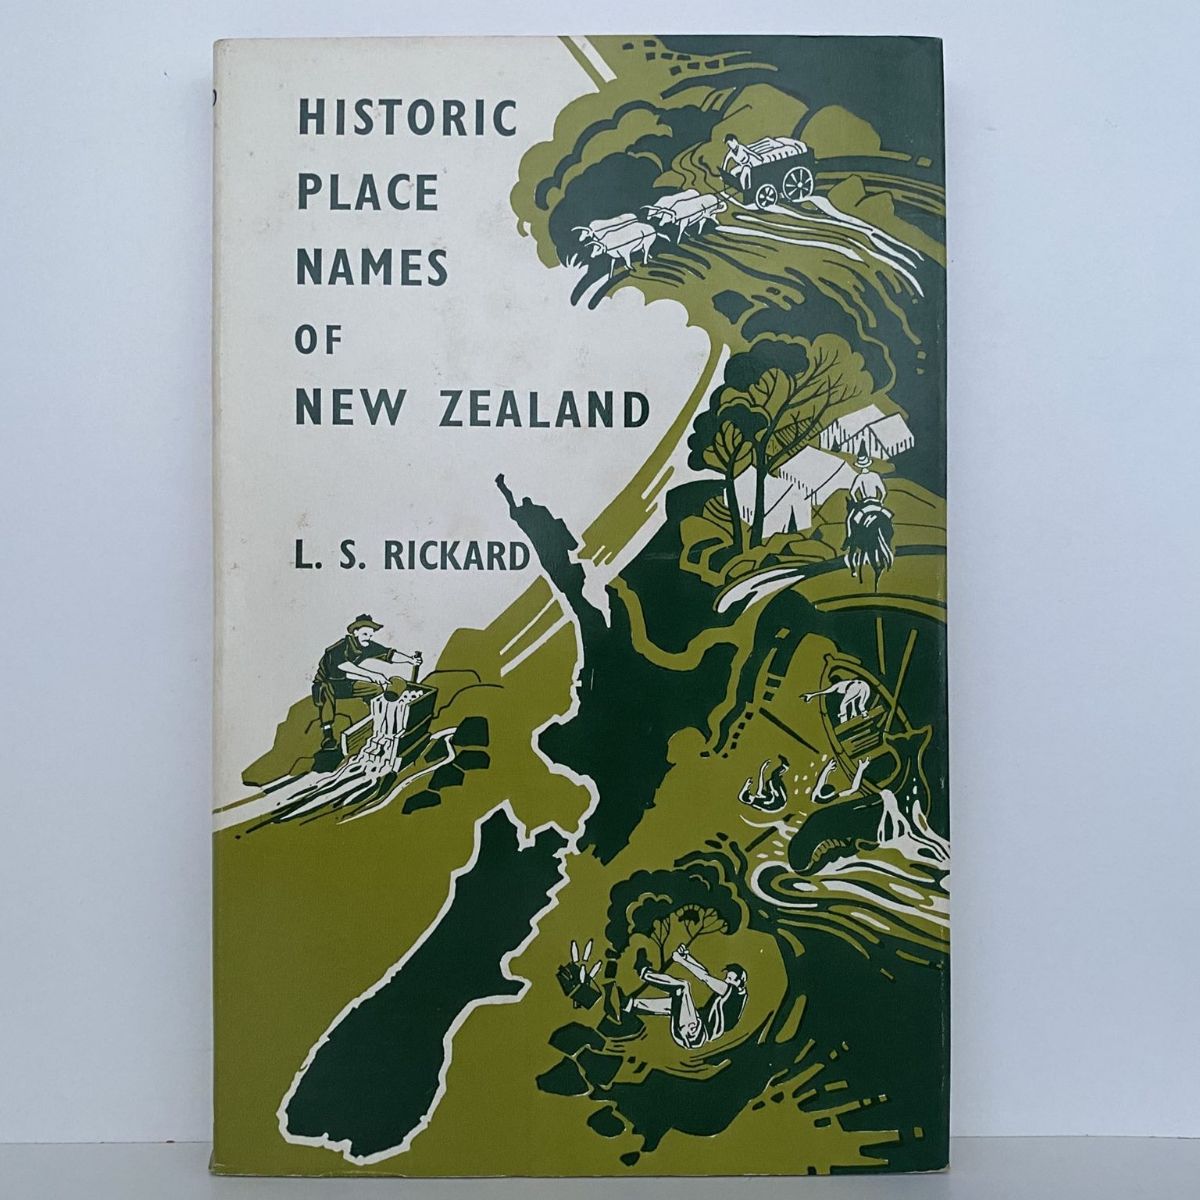 HISTORIC PLACE NAMES OF NEW ZEALAND